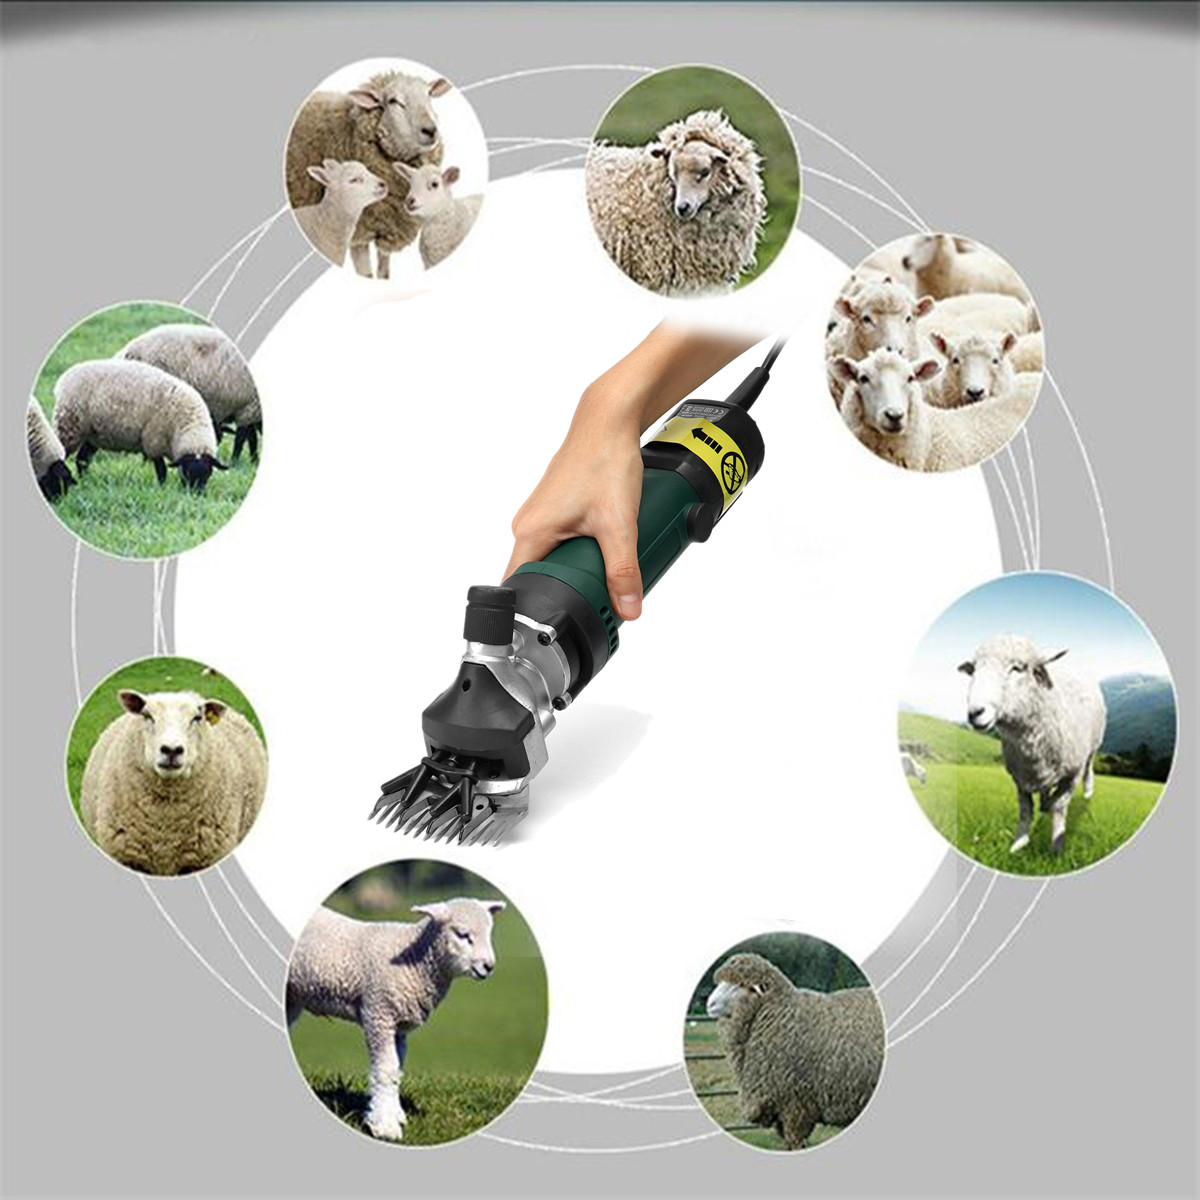 690W-6-Speed-Adjustable-Electric-Sheep-Shearing-Clipper-Shears-Goats-Hair-Removal-Trimmer-1323344-3